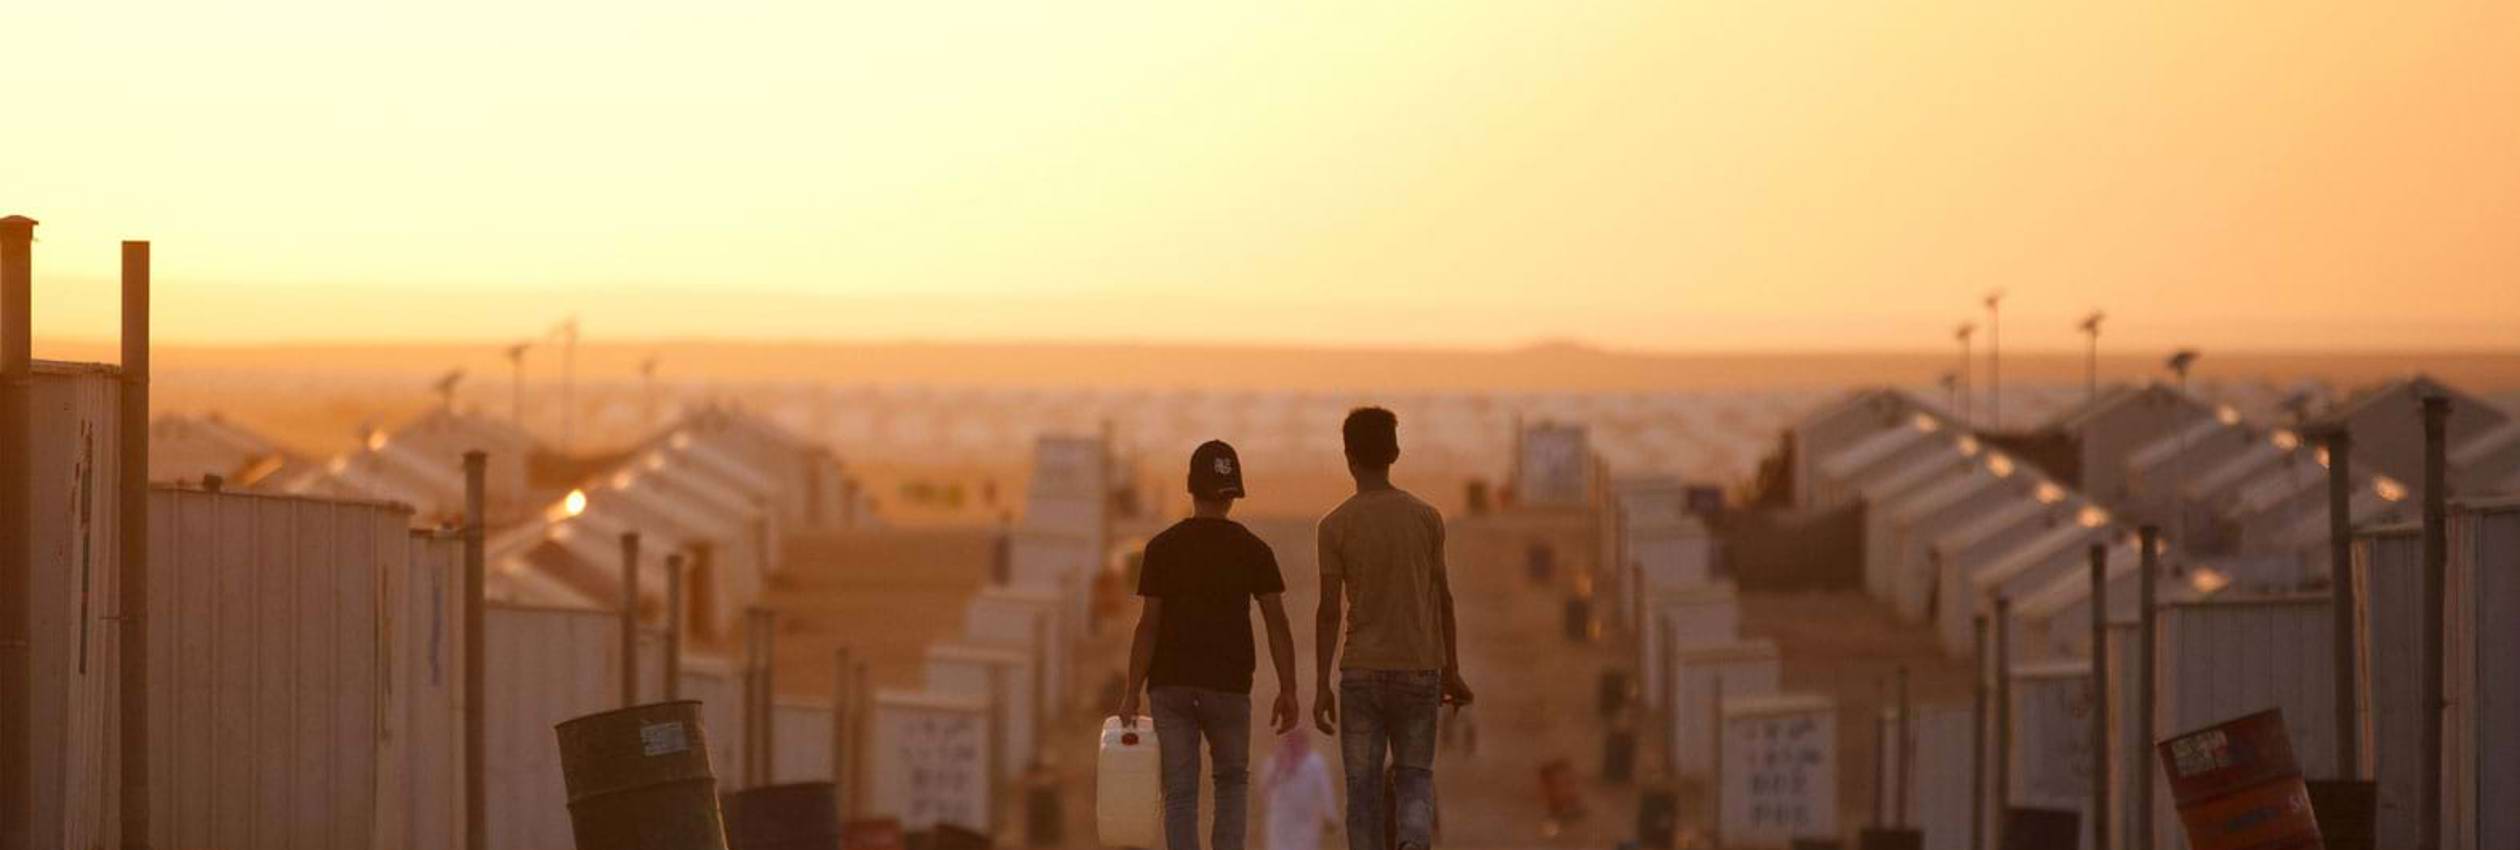 Two young refugee boys walking through a village of temporary tent accommodation